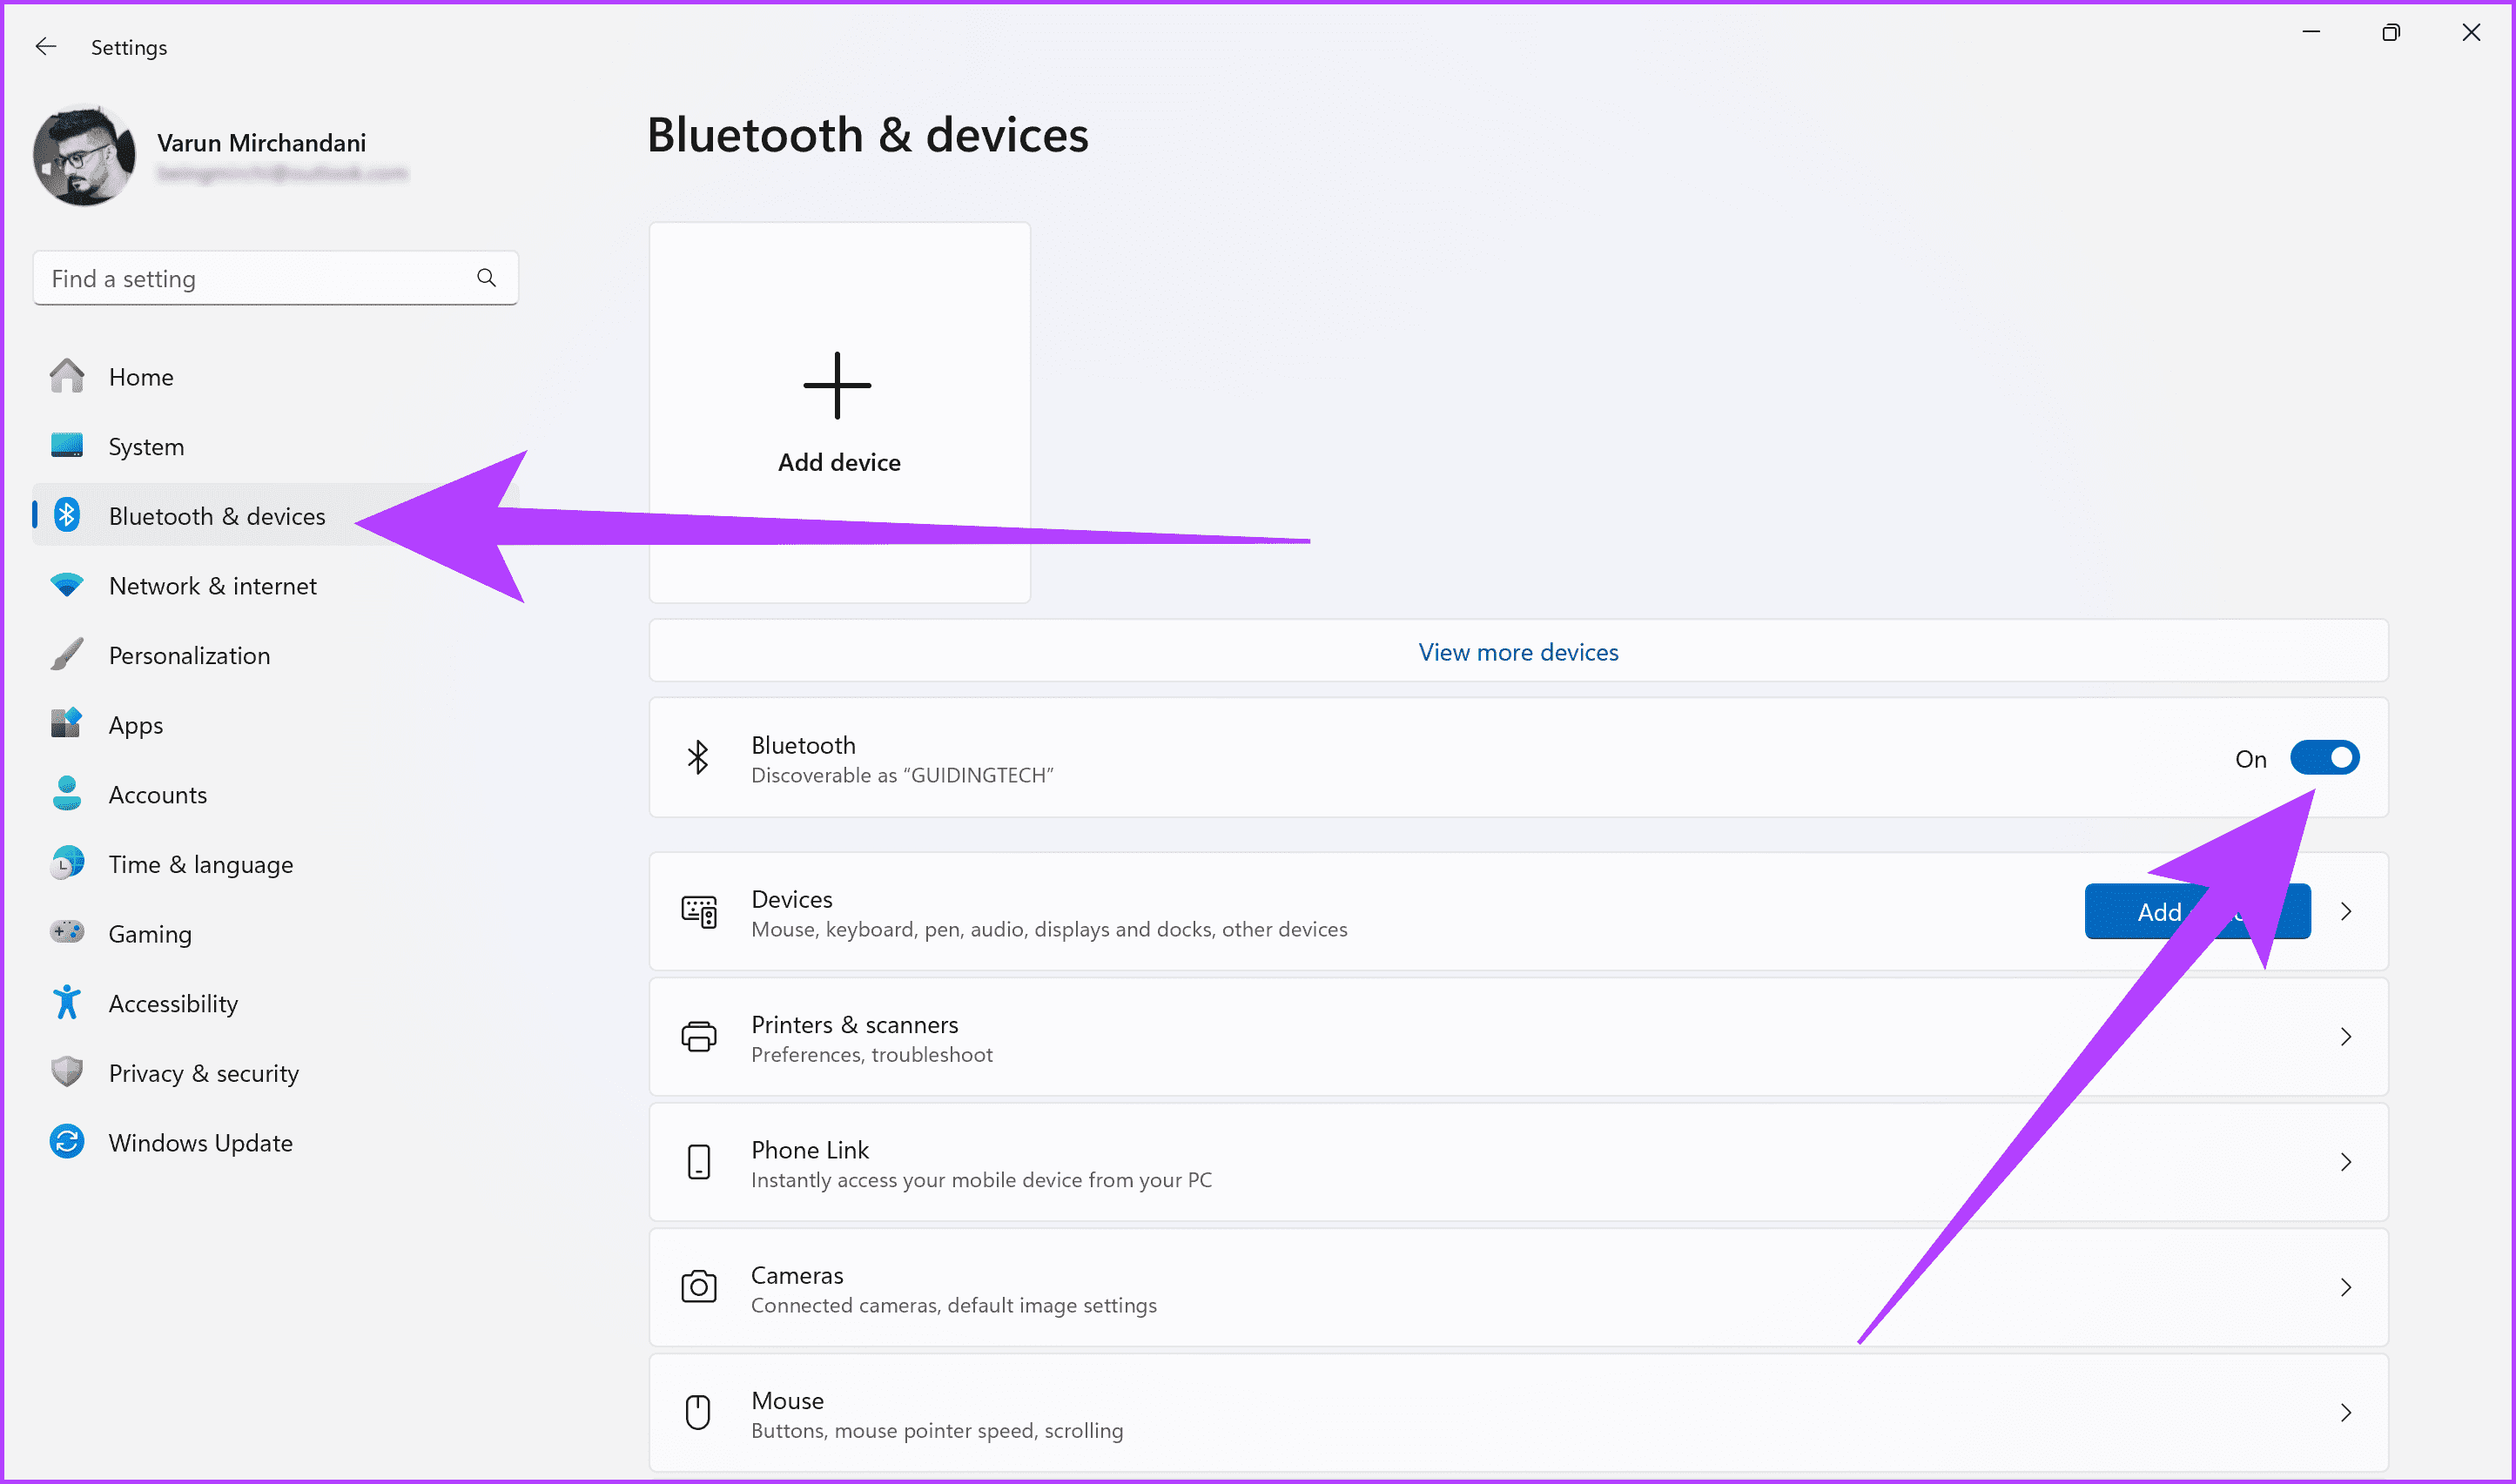 1.1 Click on the Bluetooth devices section on the left side and enable the toggle next to Bluetooth